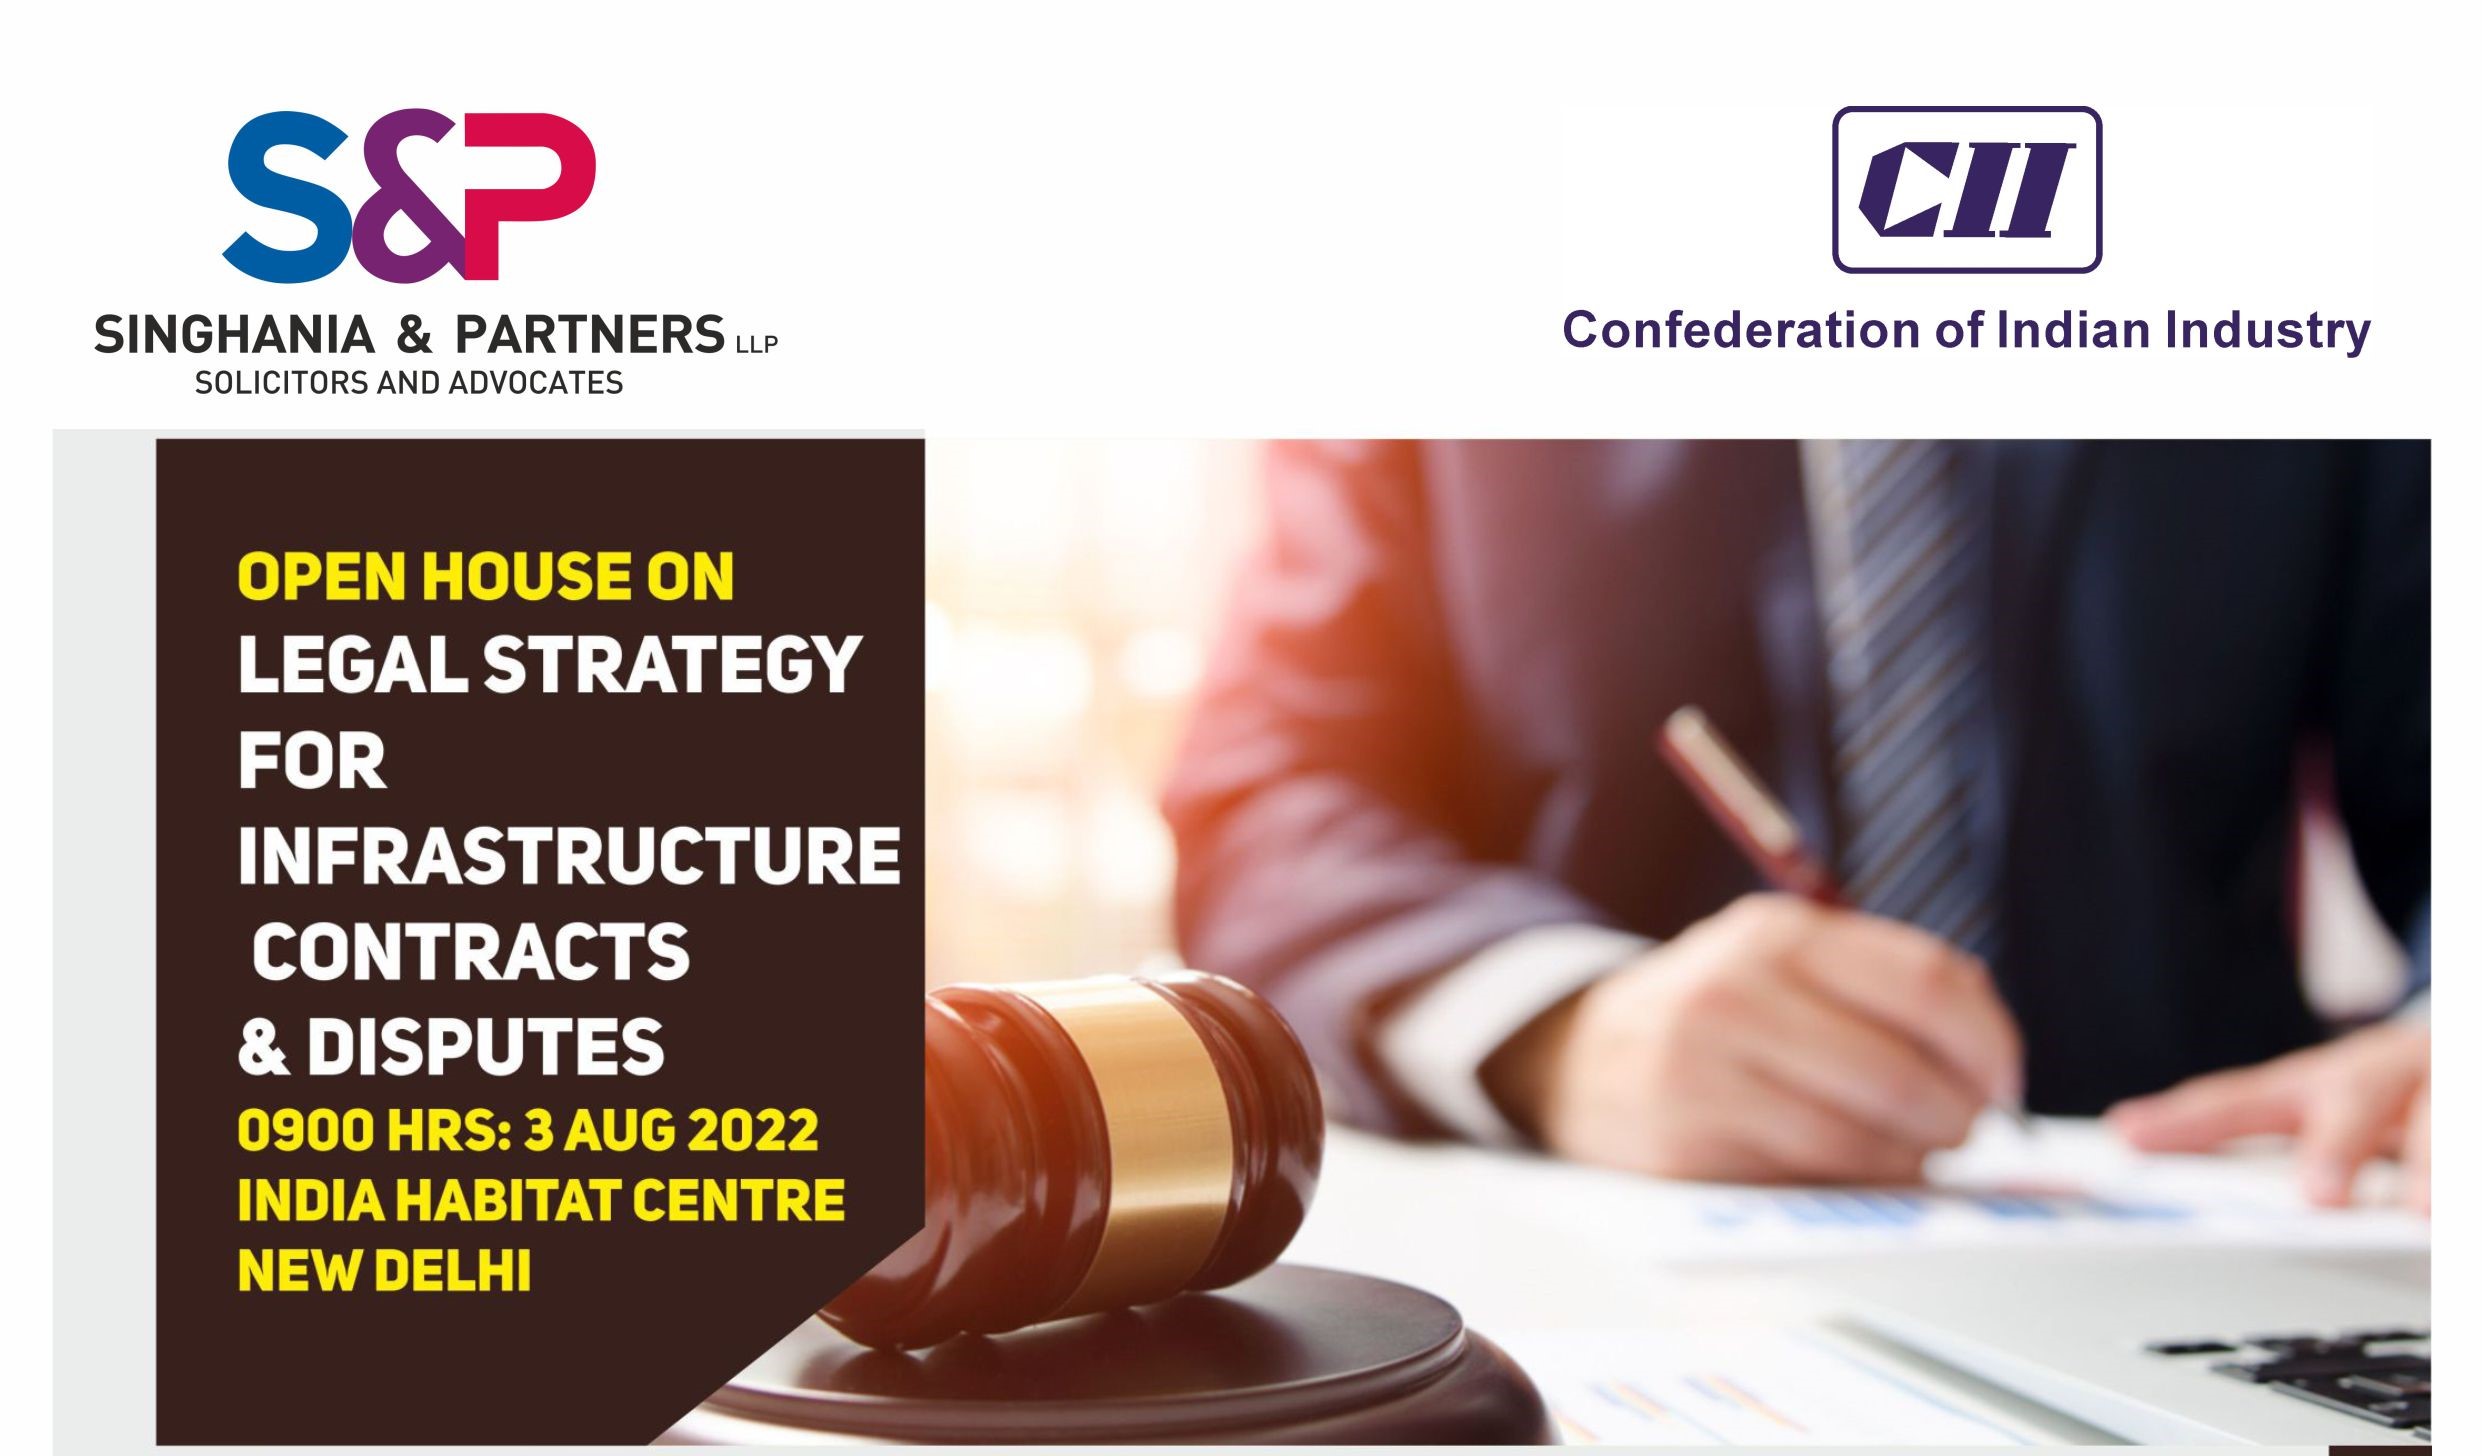 Open House on Legal Strategy for Infrastructure Contracts & Disputes